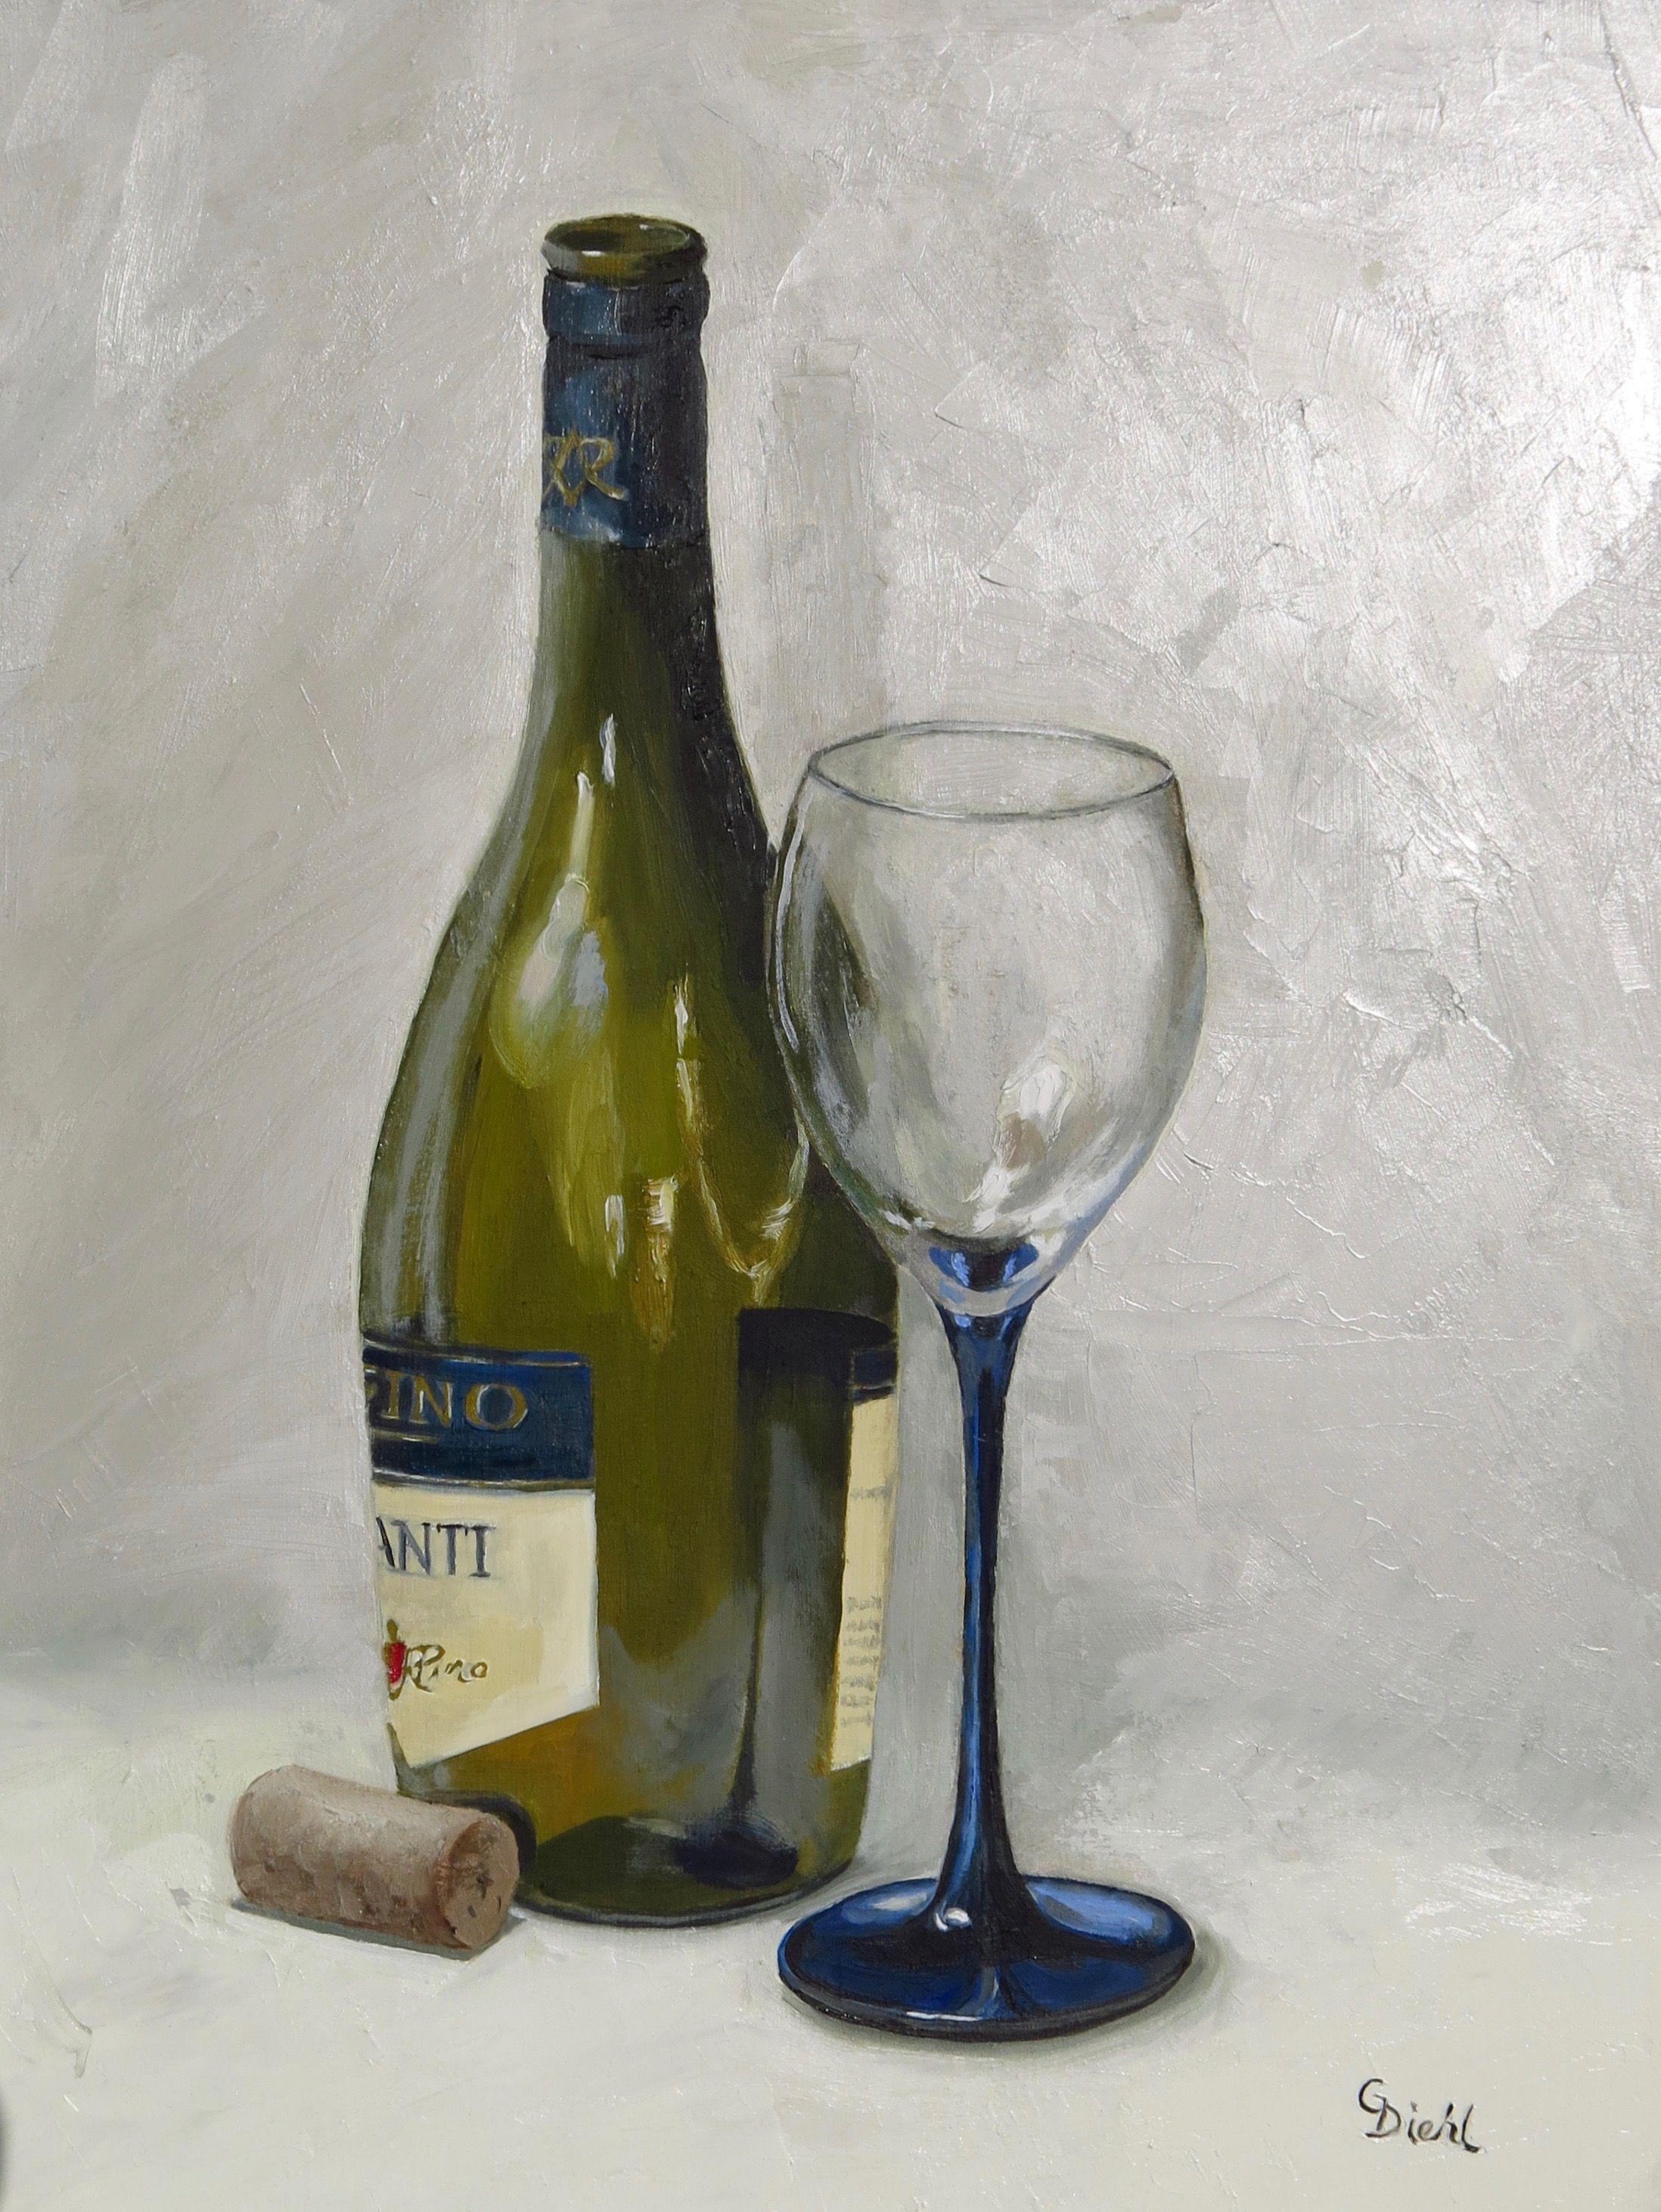 This classic themed original displays a wine glass and bottle. It has been painted in the traditional, realism style on a 11"x14" support. This fine artwork has been framed in a gold frame and is ready to hang. Please note that many frames have been